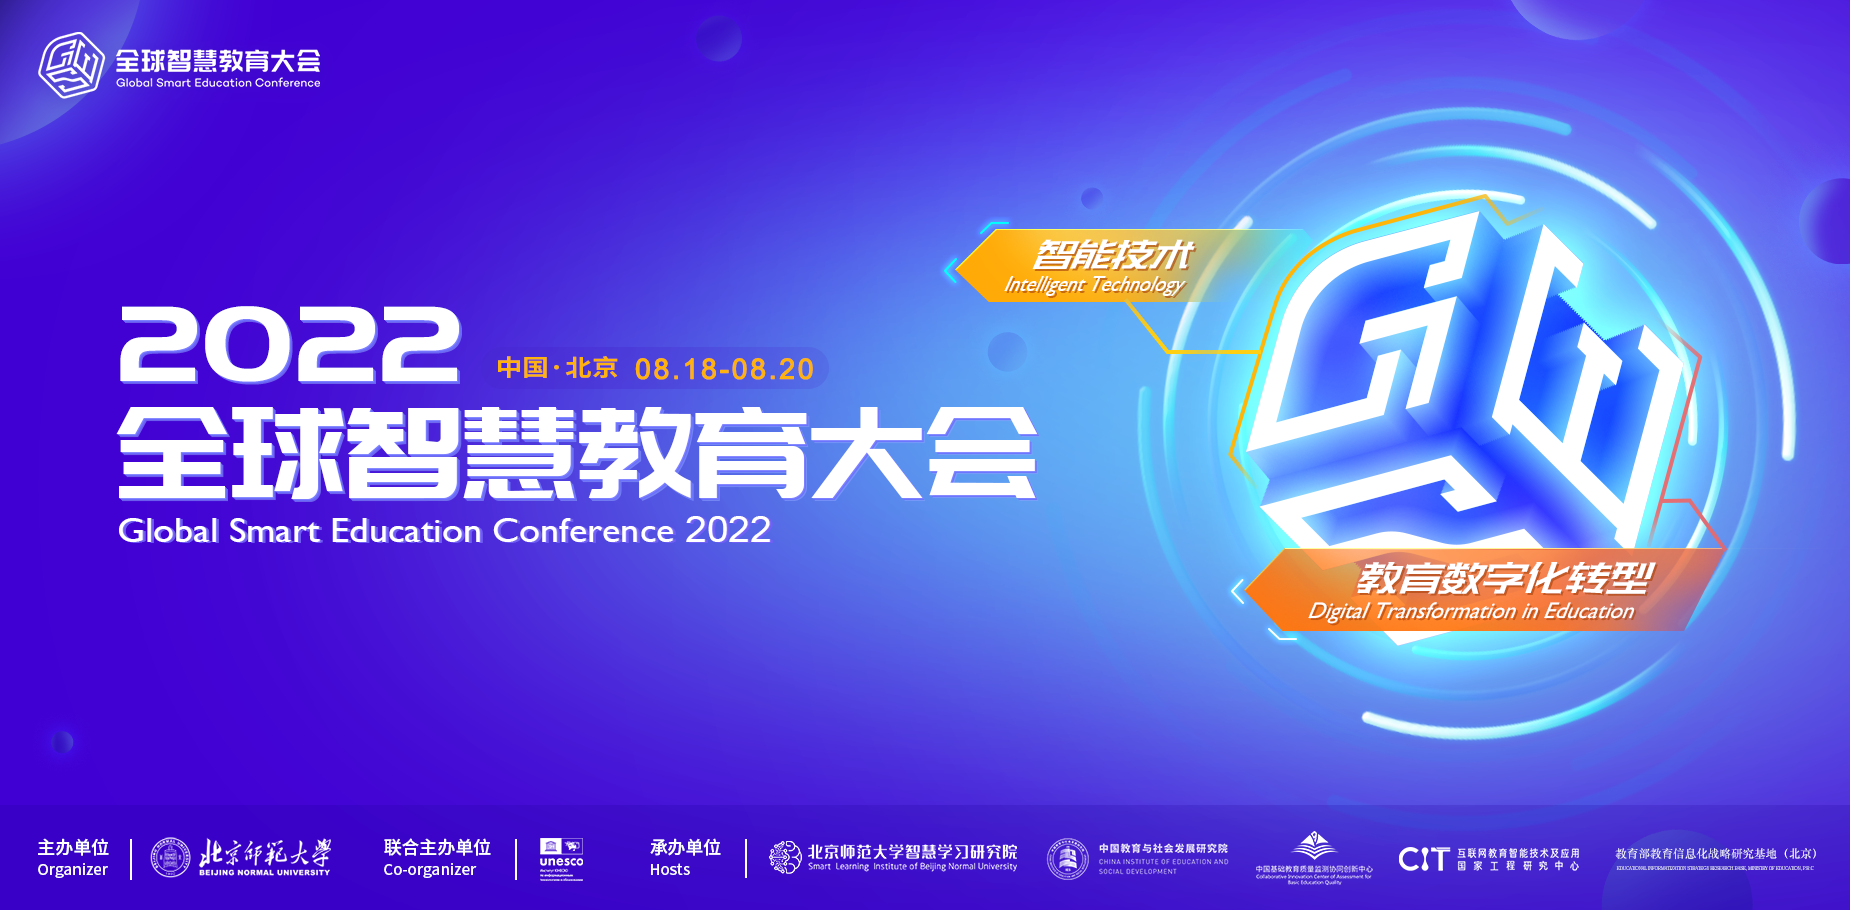 Global Smart Education Conference 2022